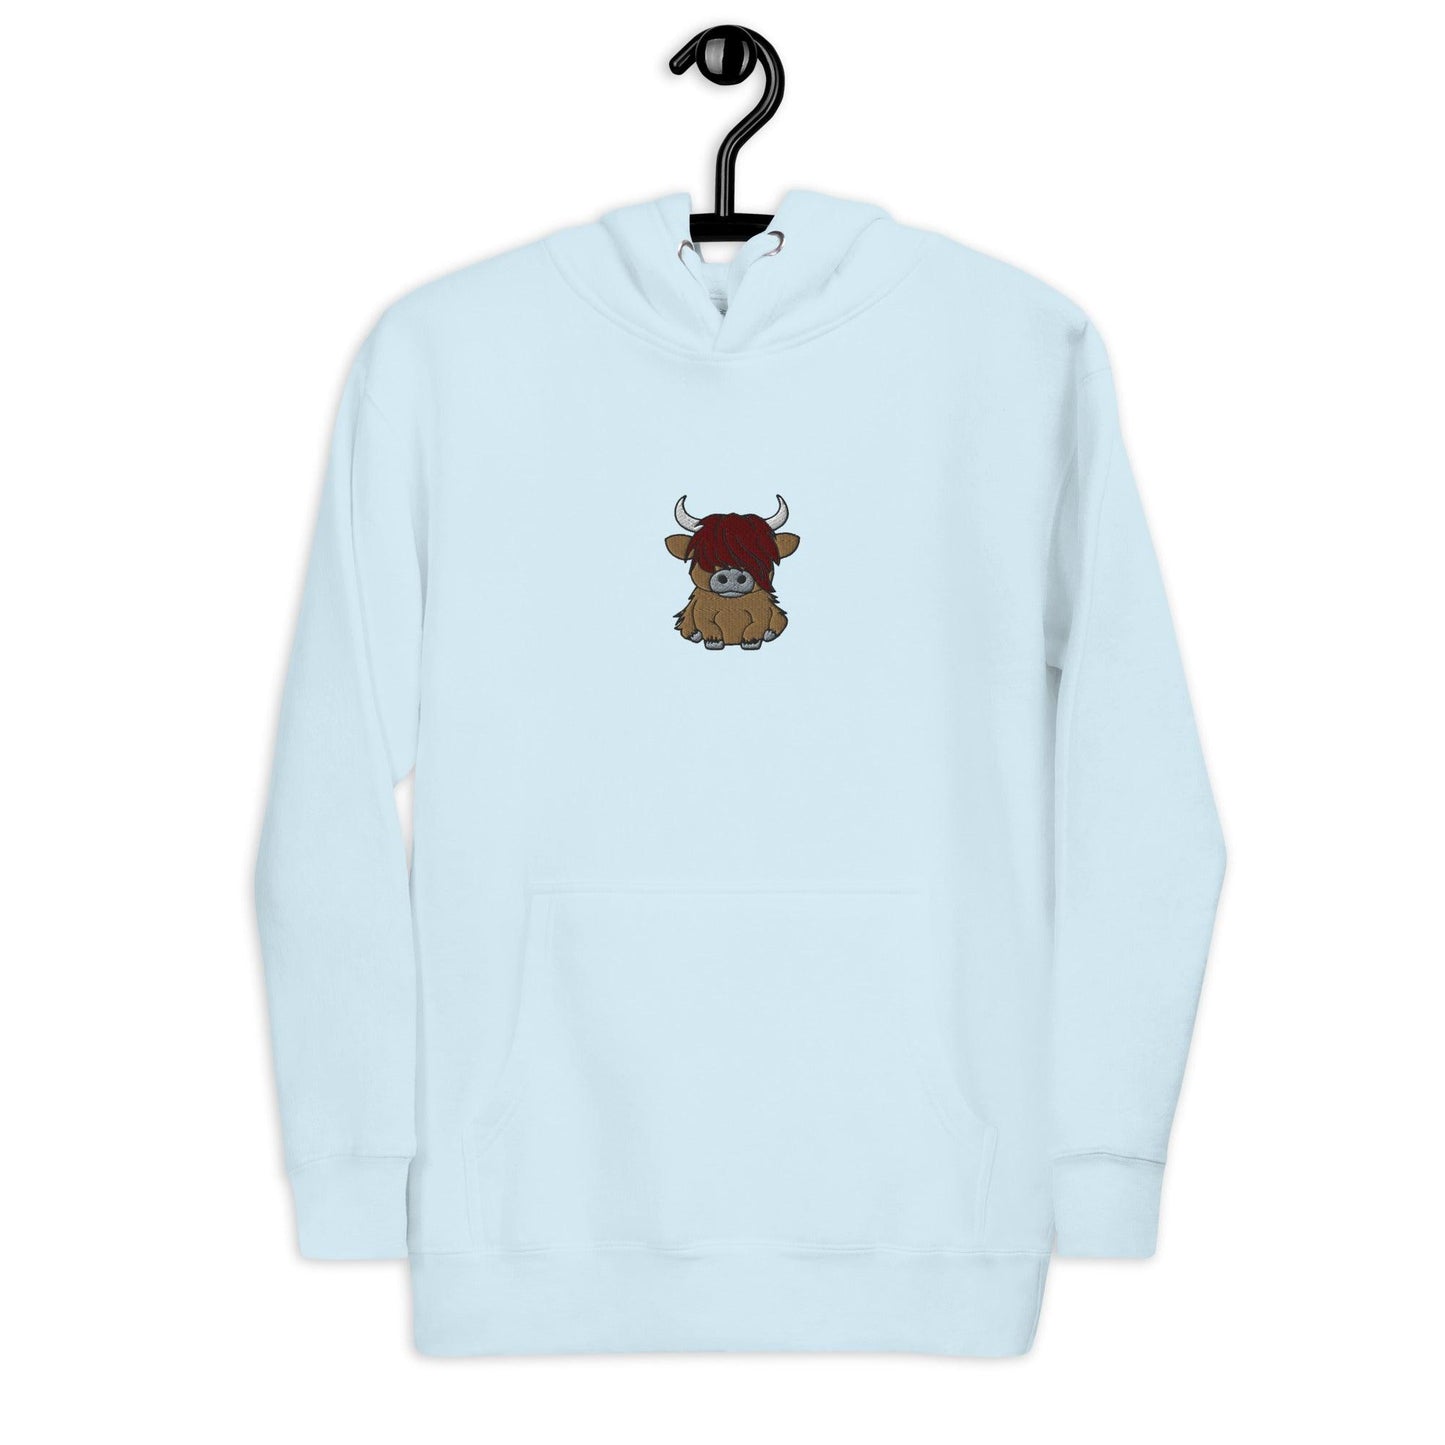 Scottish Higland Cow Embroidered Hoodie - The Global Wanderer